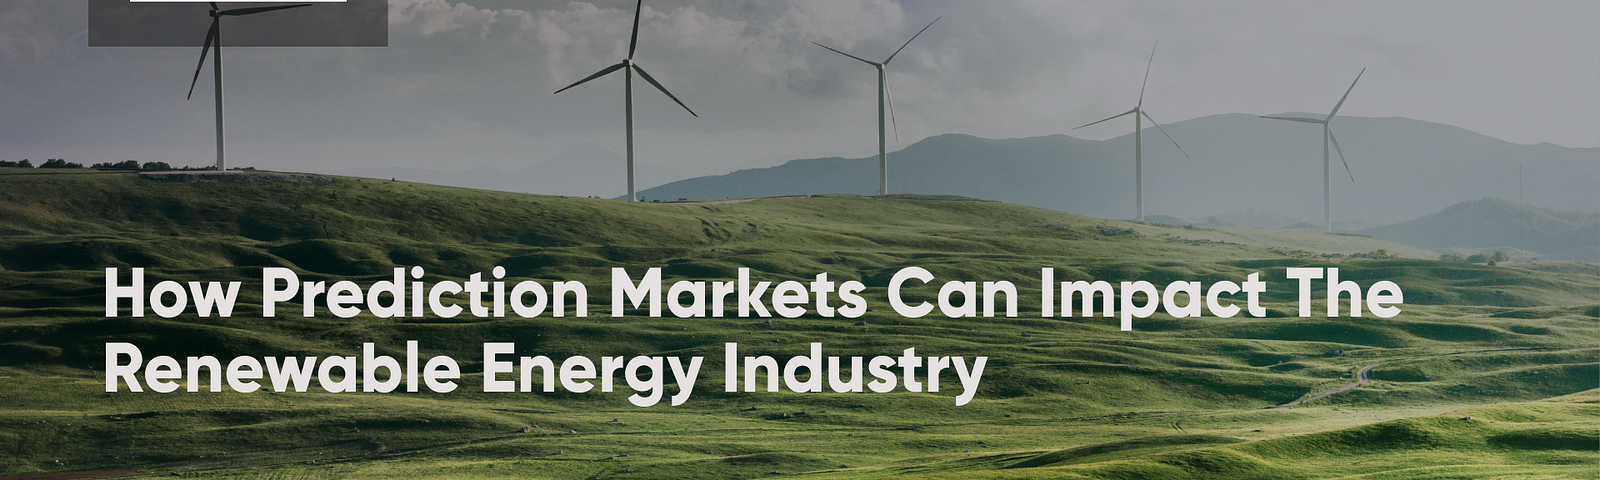 In The Wild: How Prediction Markets Can Impact The Renewable Energy Industry